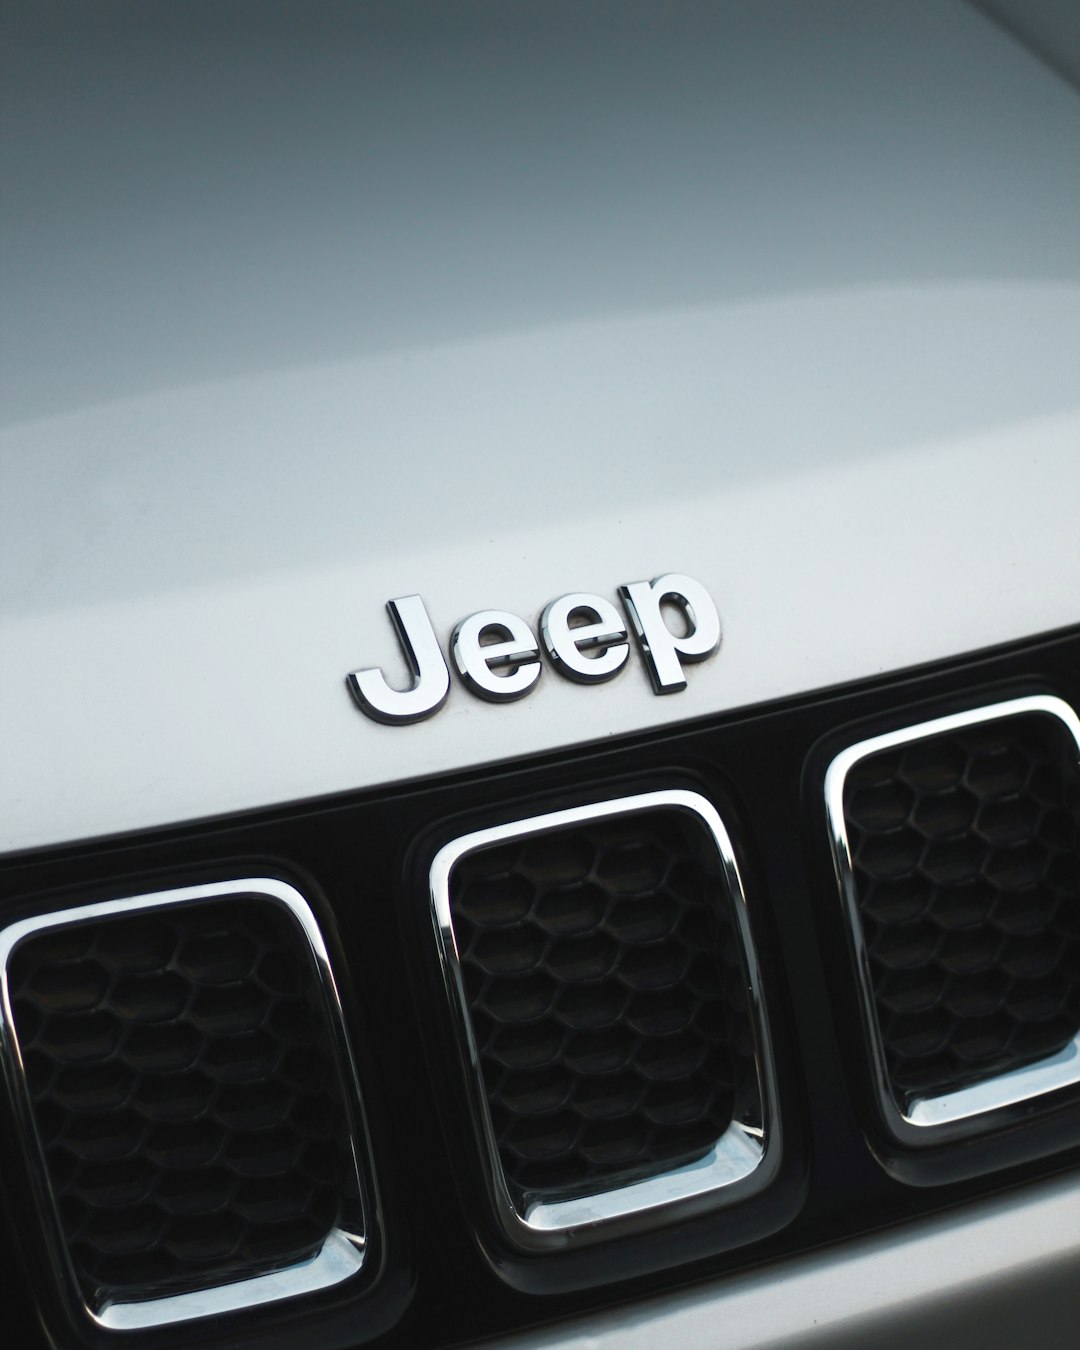 The Jeep Grand Cherokee 4xe is a hybrid SUV that combines impressive off-road capability with a fuel-efficient plug-in electric powertrain.